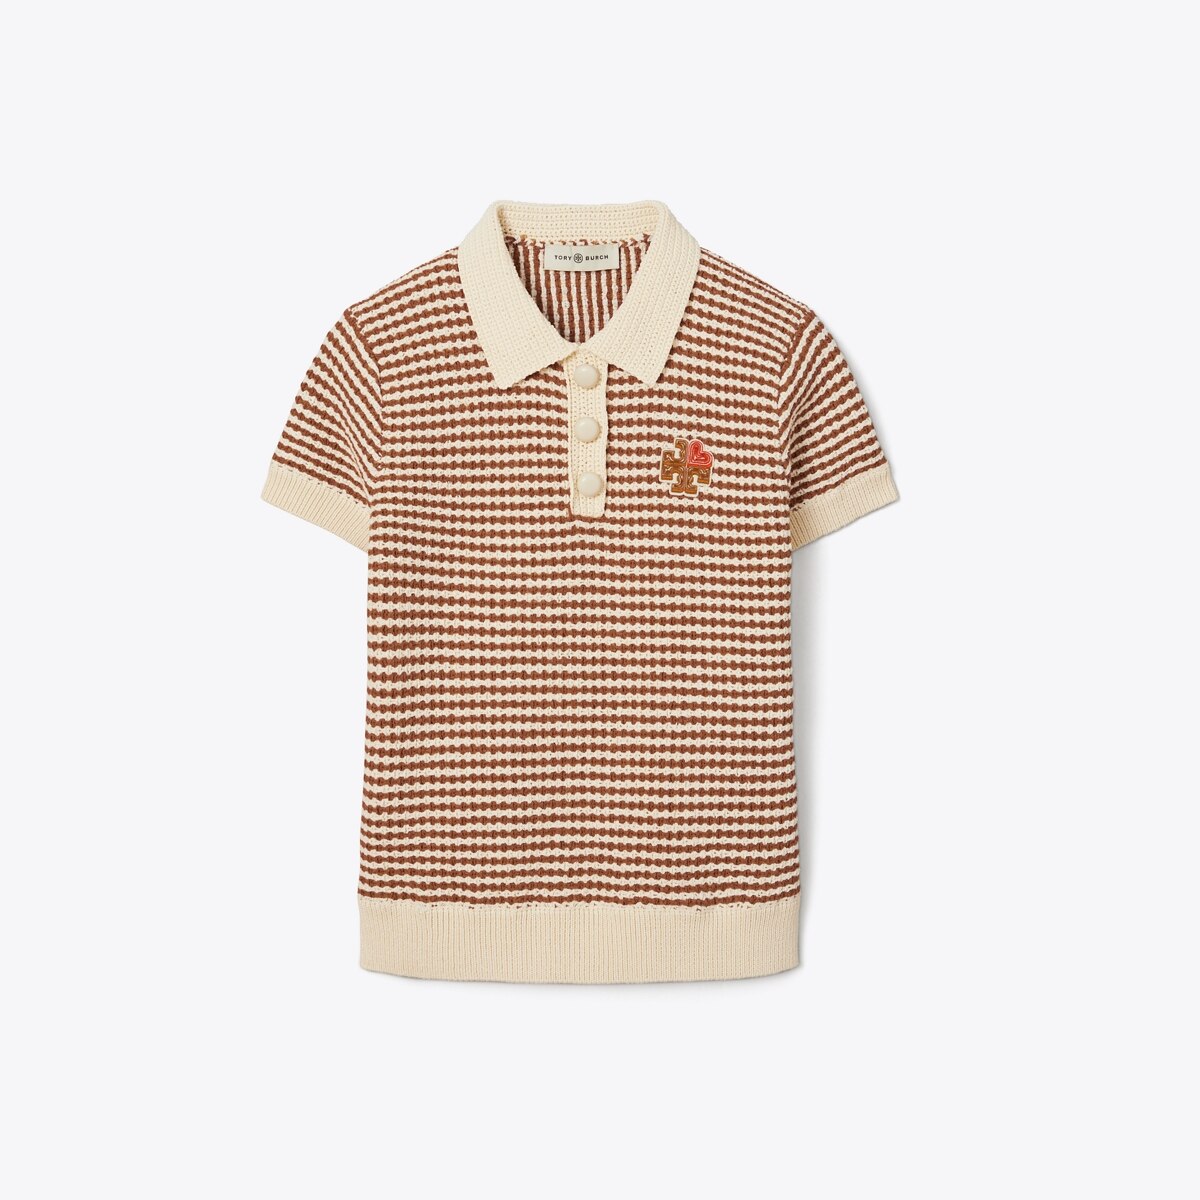 Women's Knitted Polo Shirt by Tory Burch